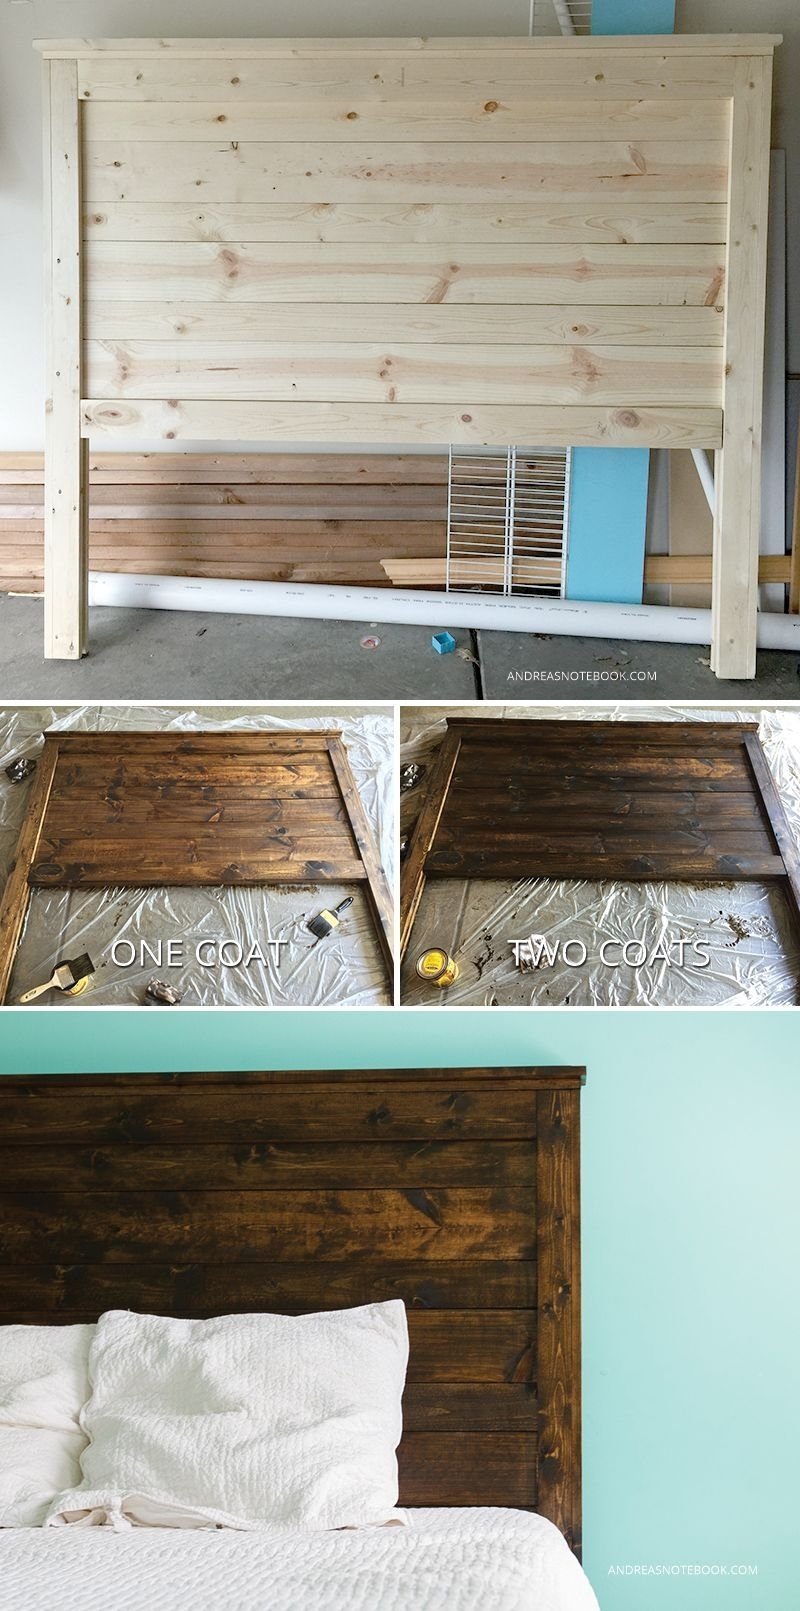 10 Lovable Make Your Own Headboard Ideas make your own diy rustic headboard andreasnotebook 2022